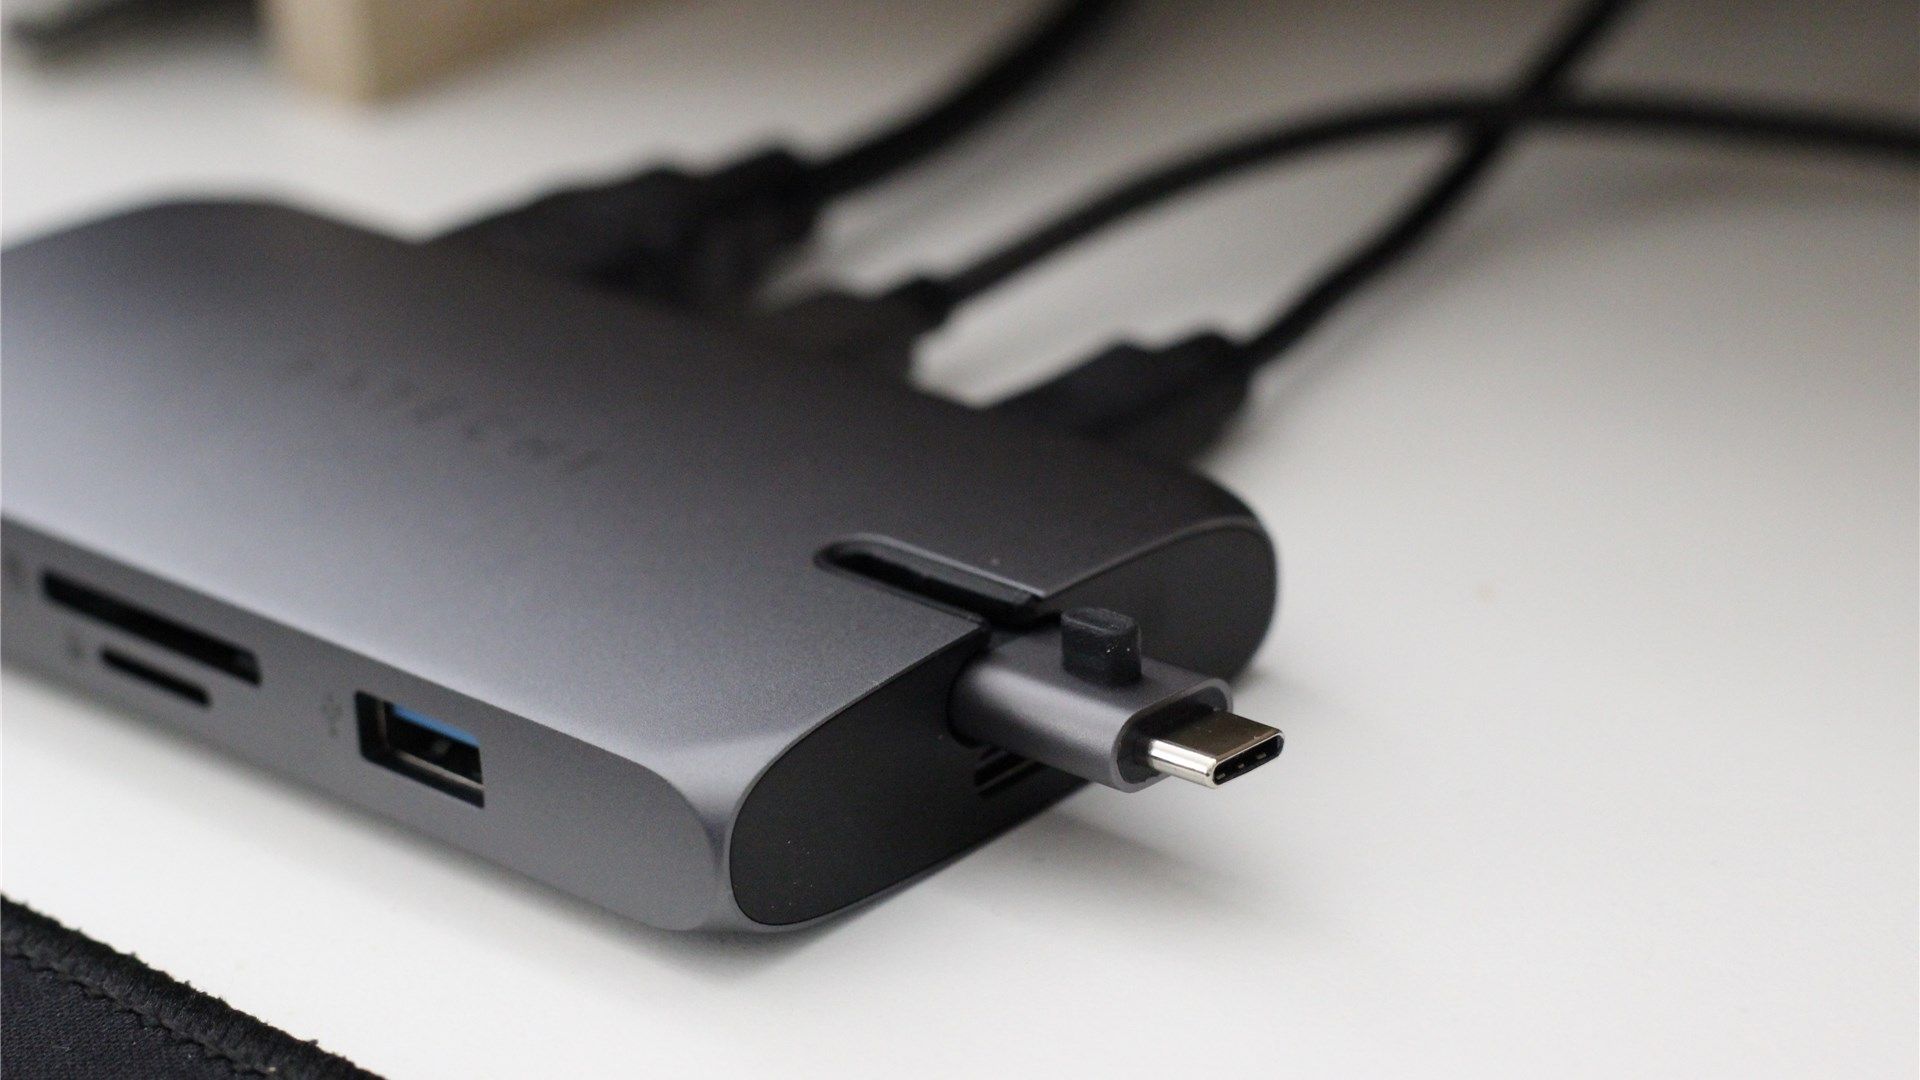 The Satechi hub with the hideaway USB-C cable slightly extended 